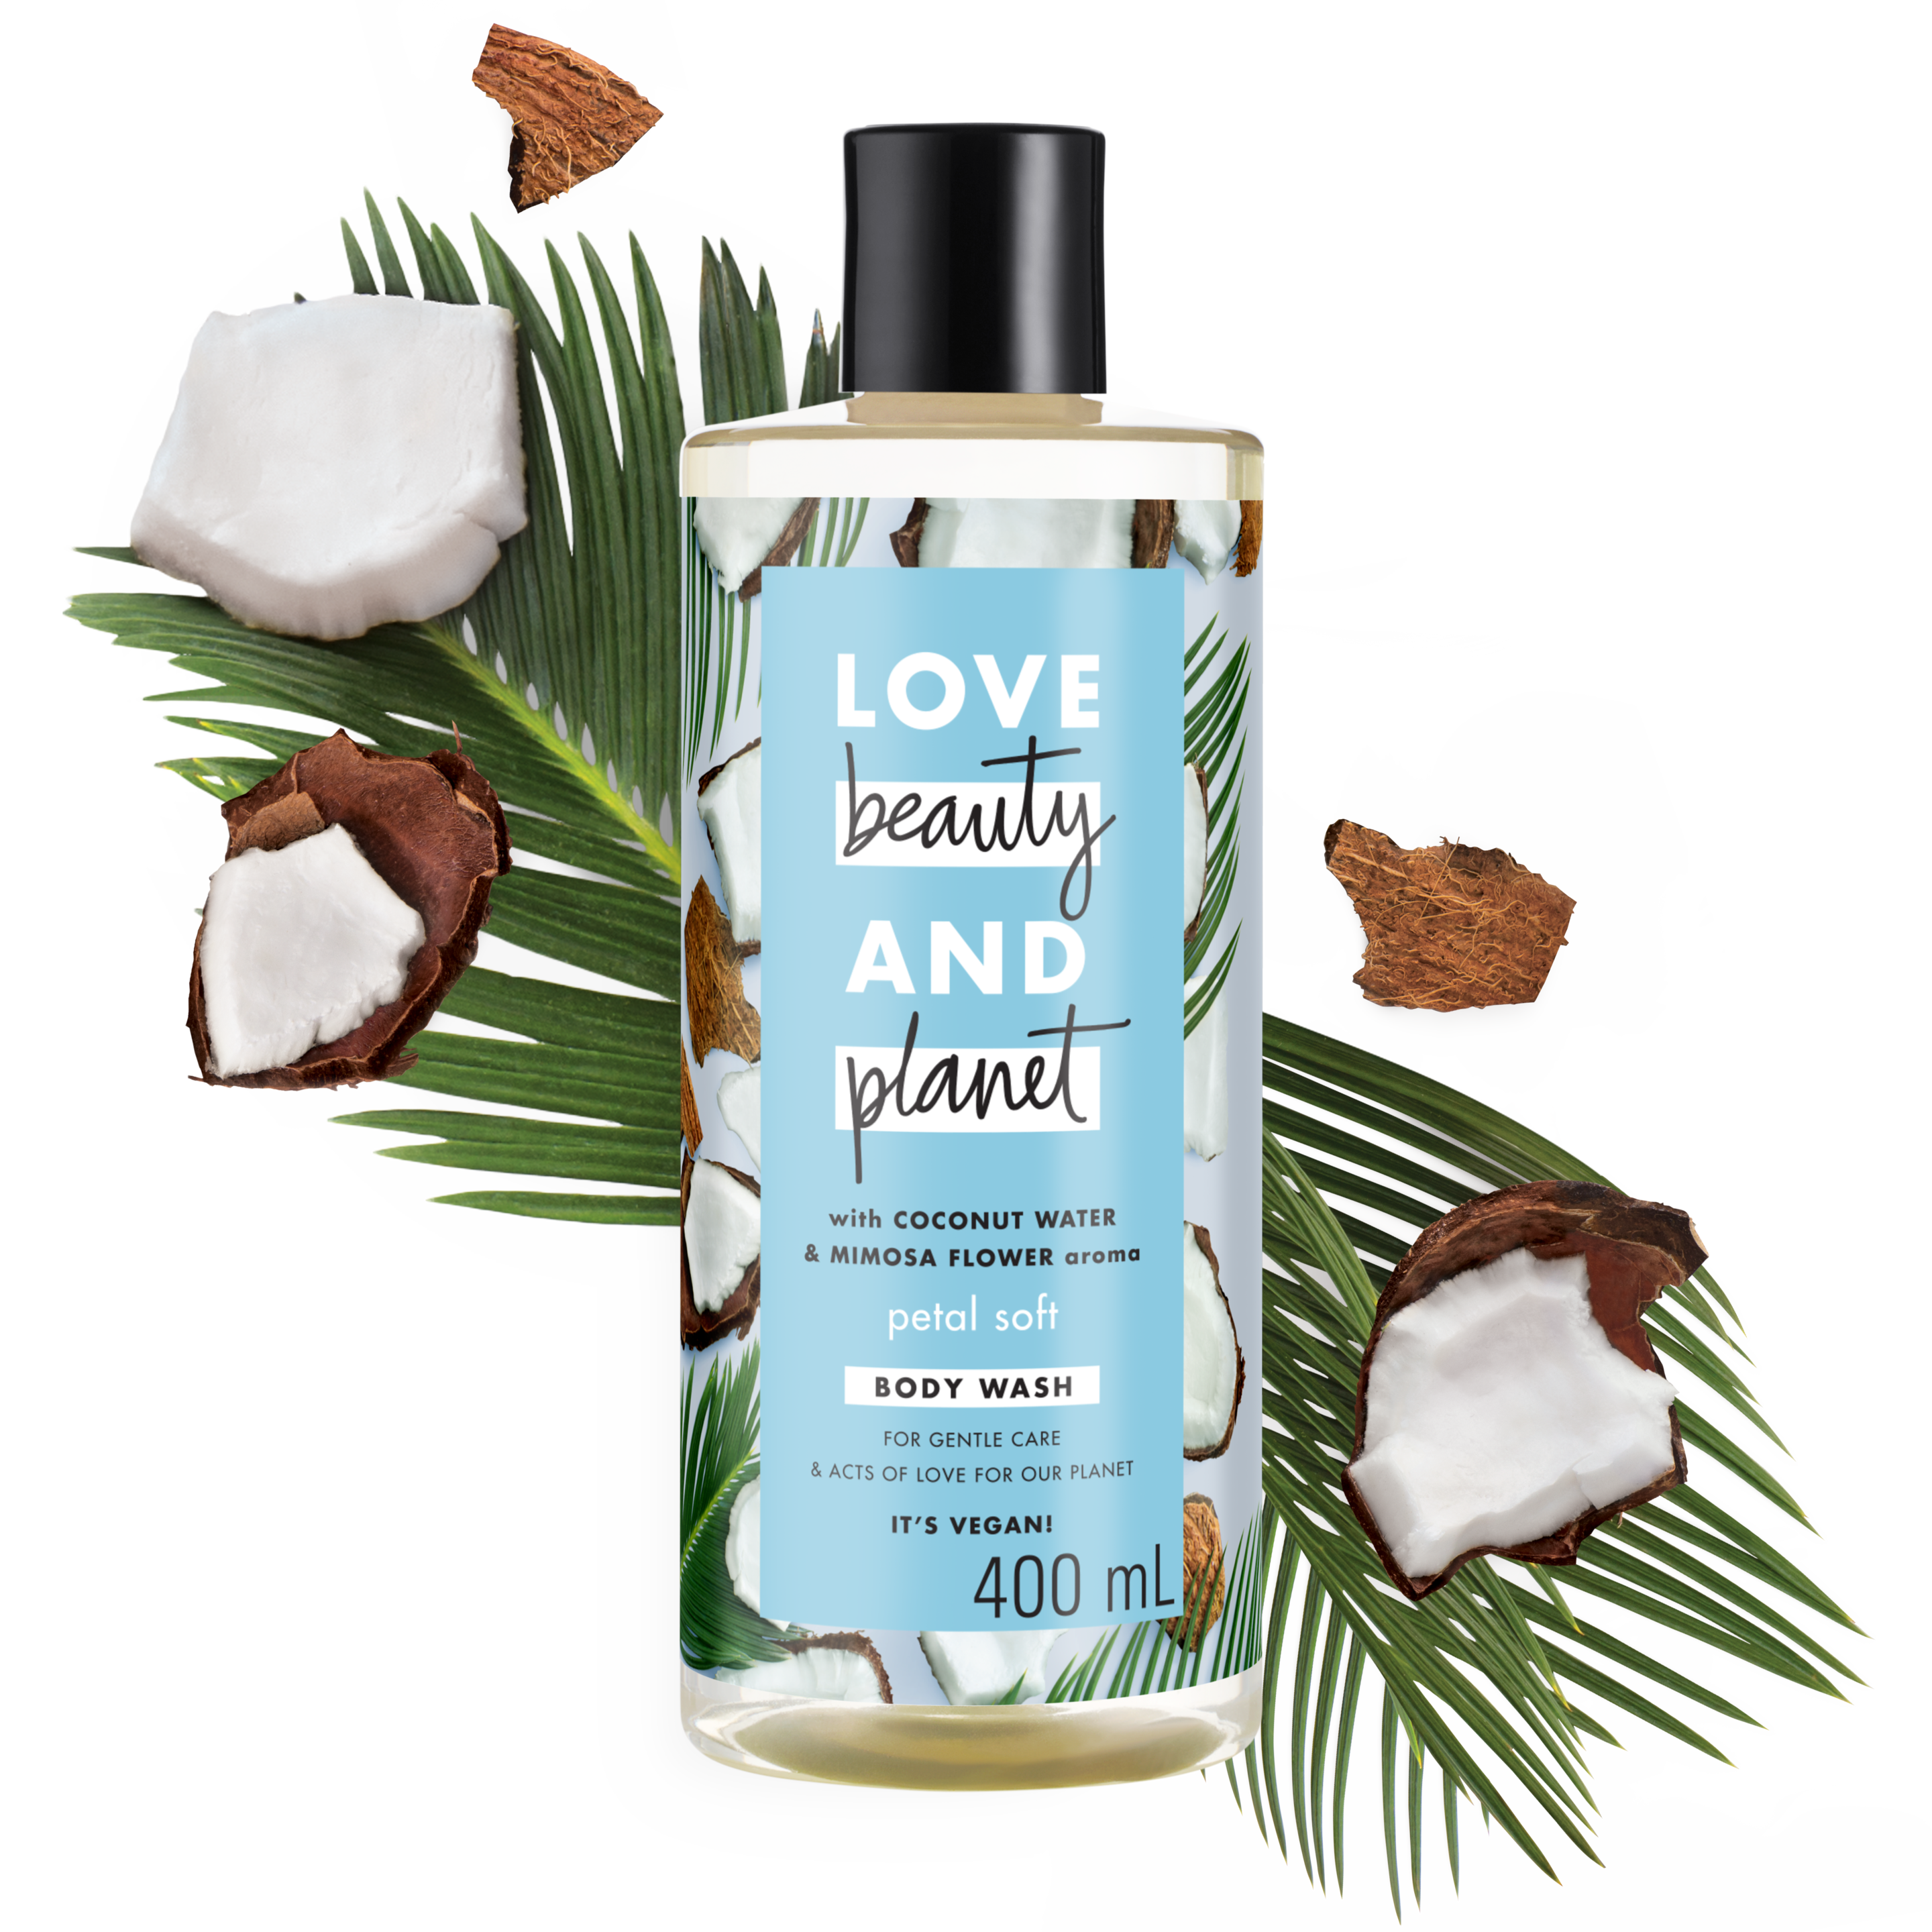 Coconut Water & Mimosa Flower Body Wash Text